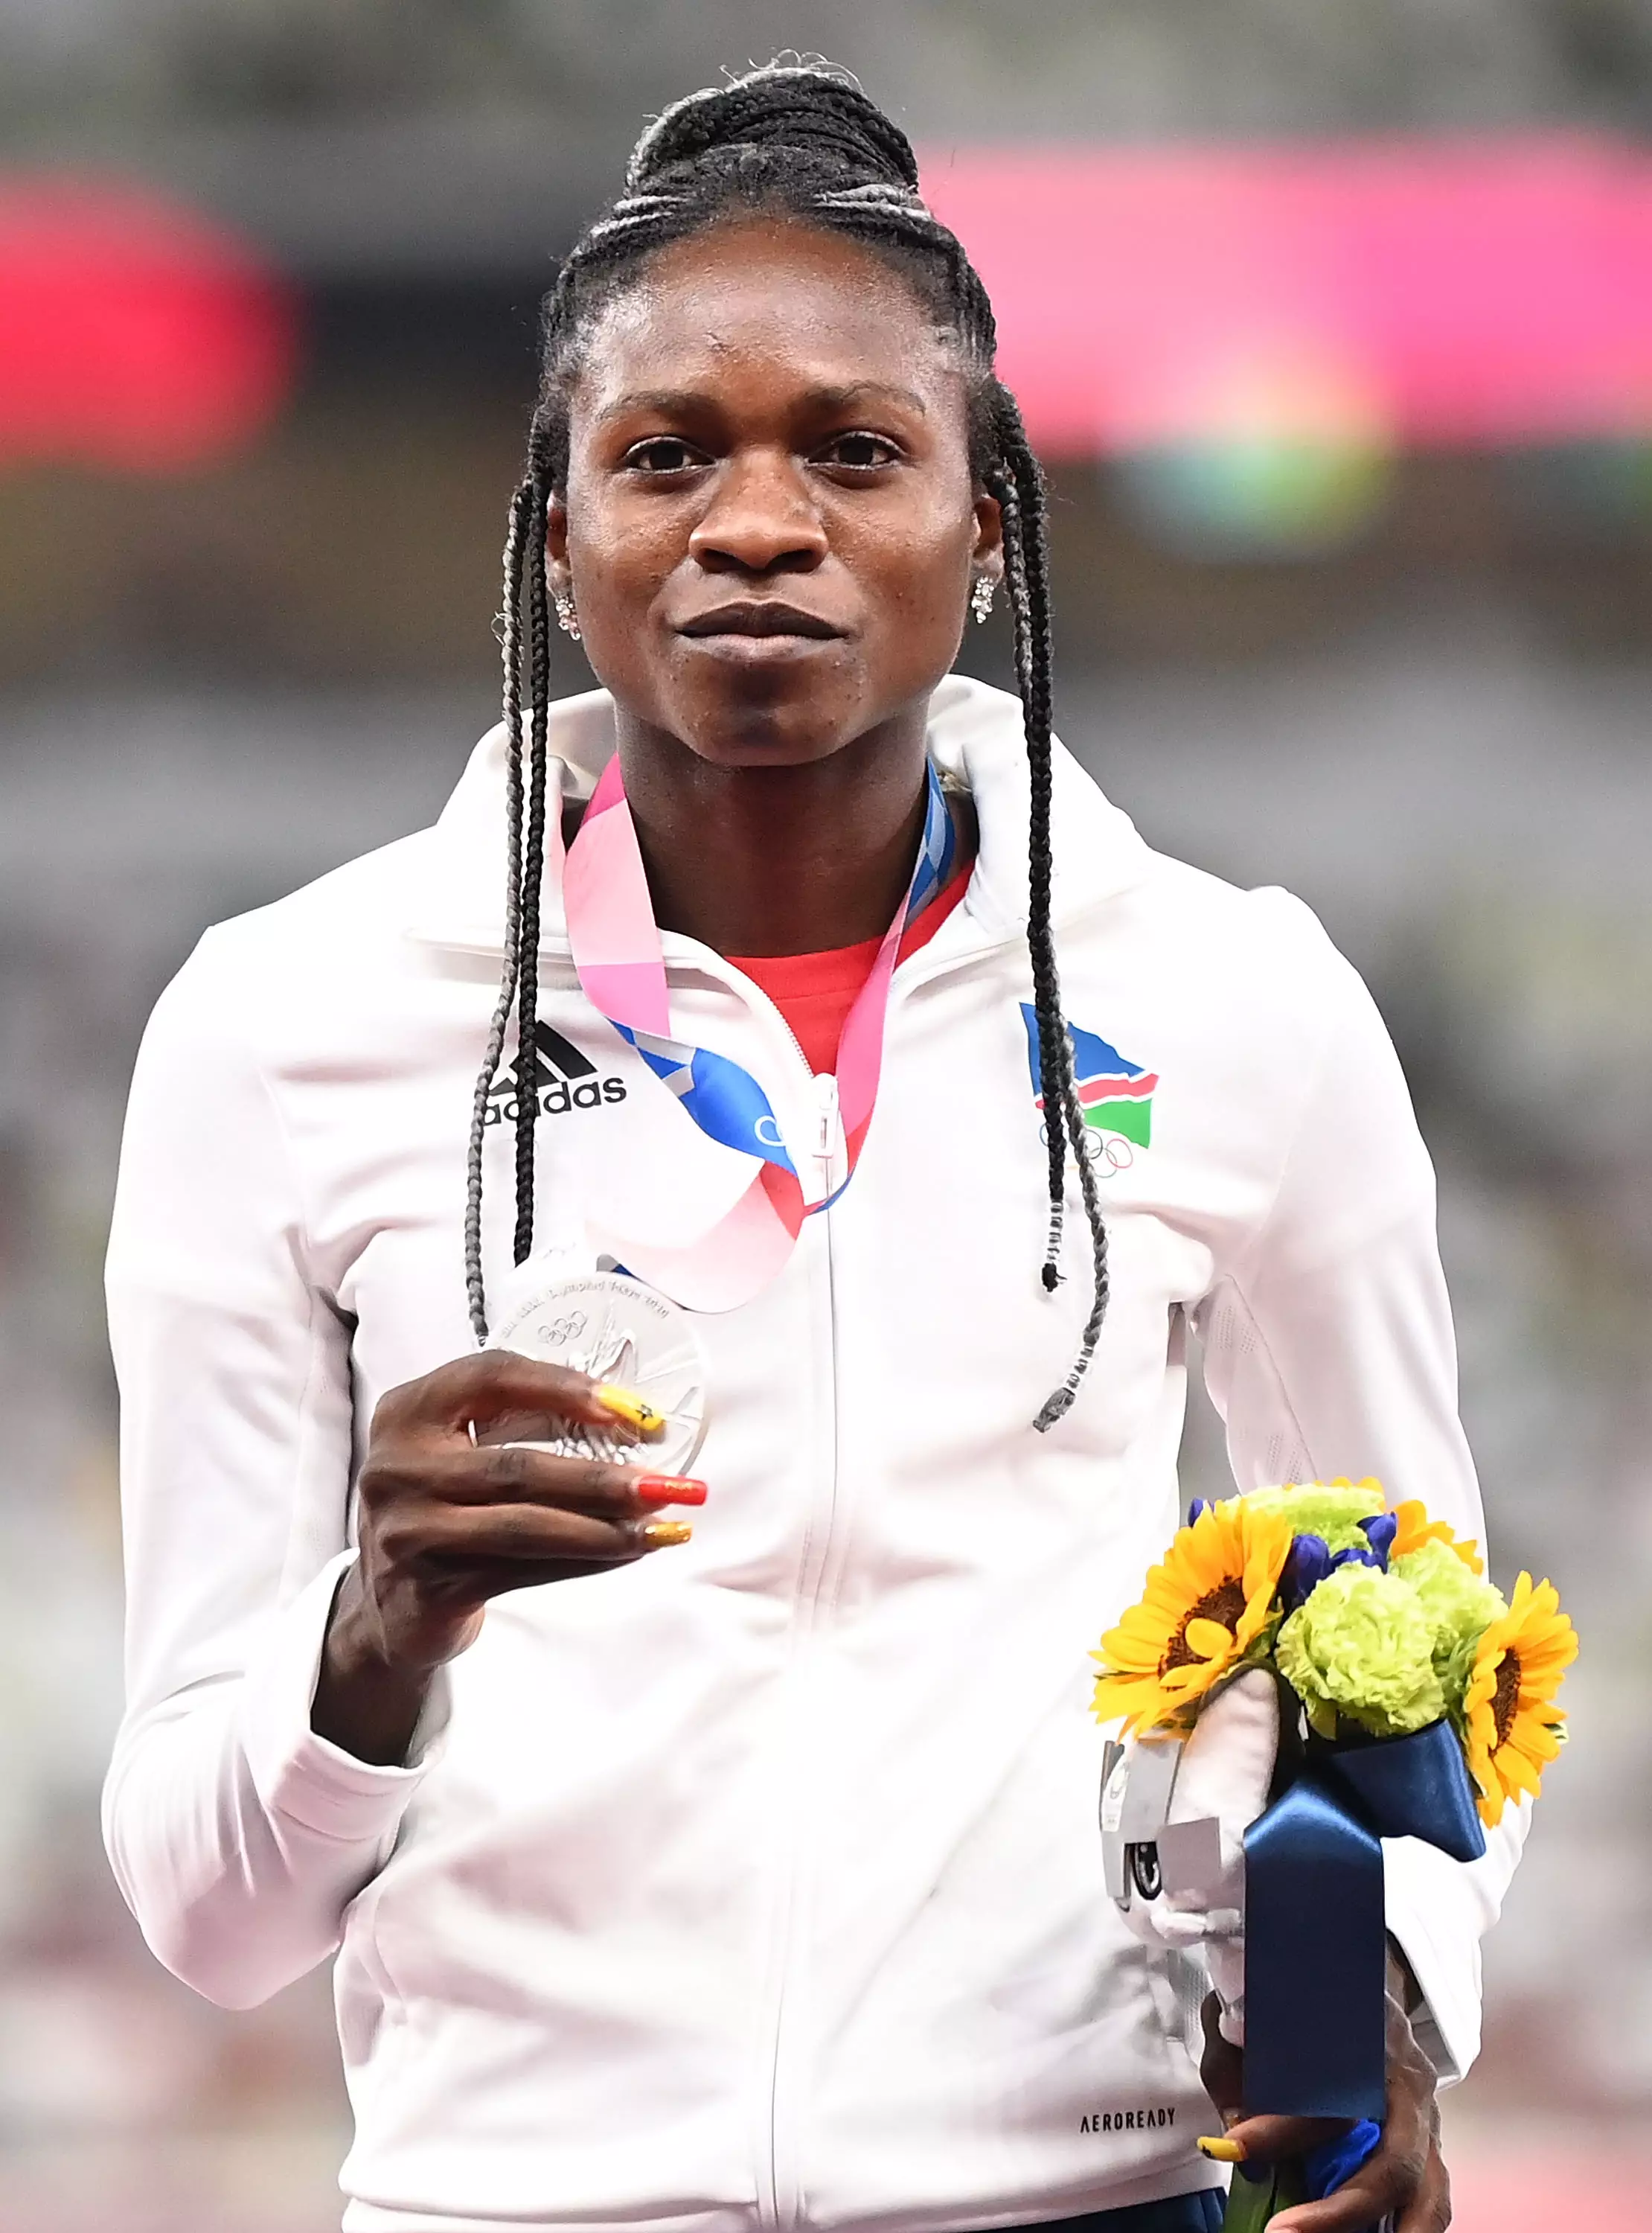 Christine Mboma came second in the women's 200m final.